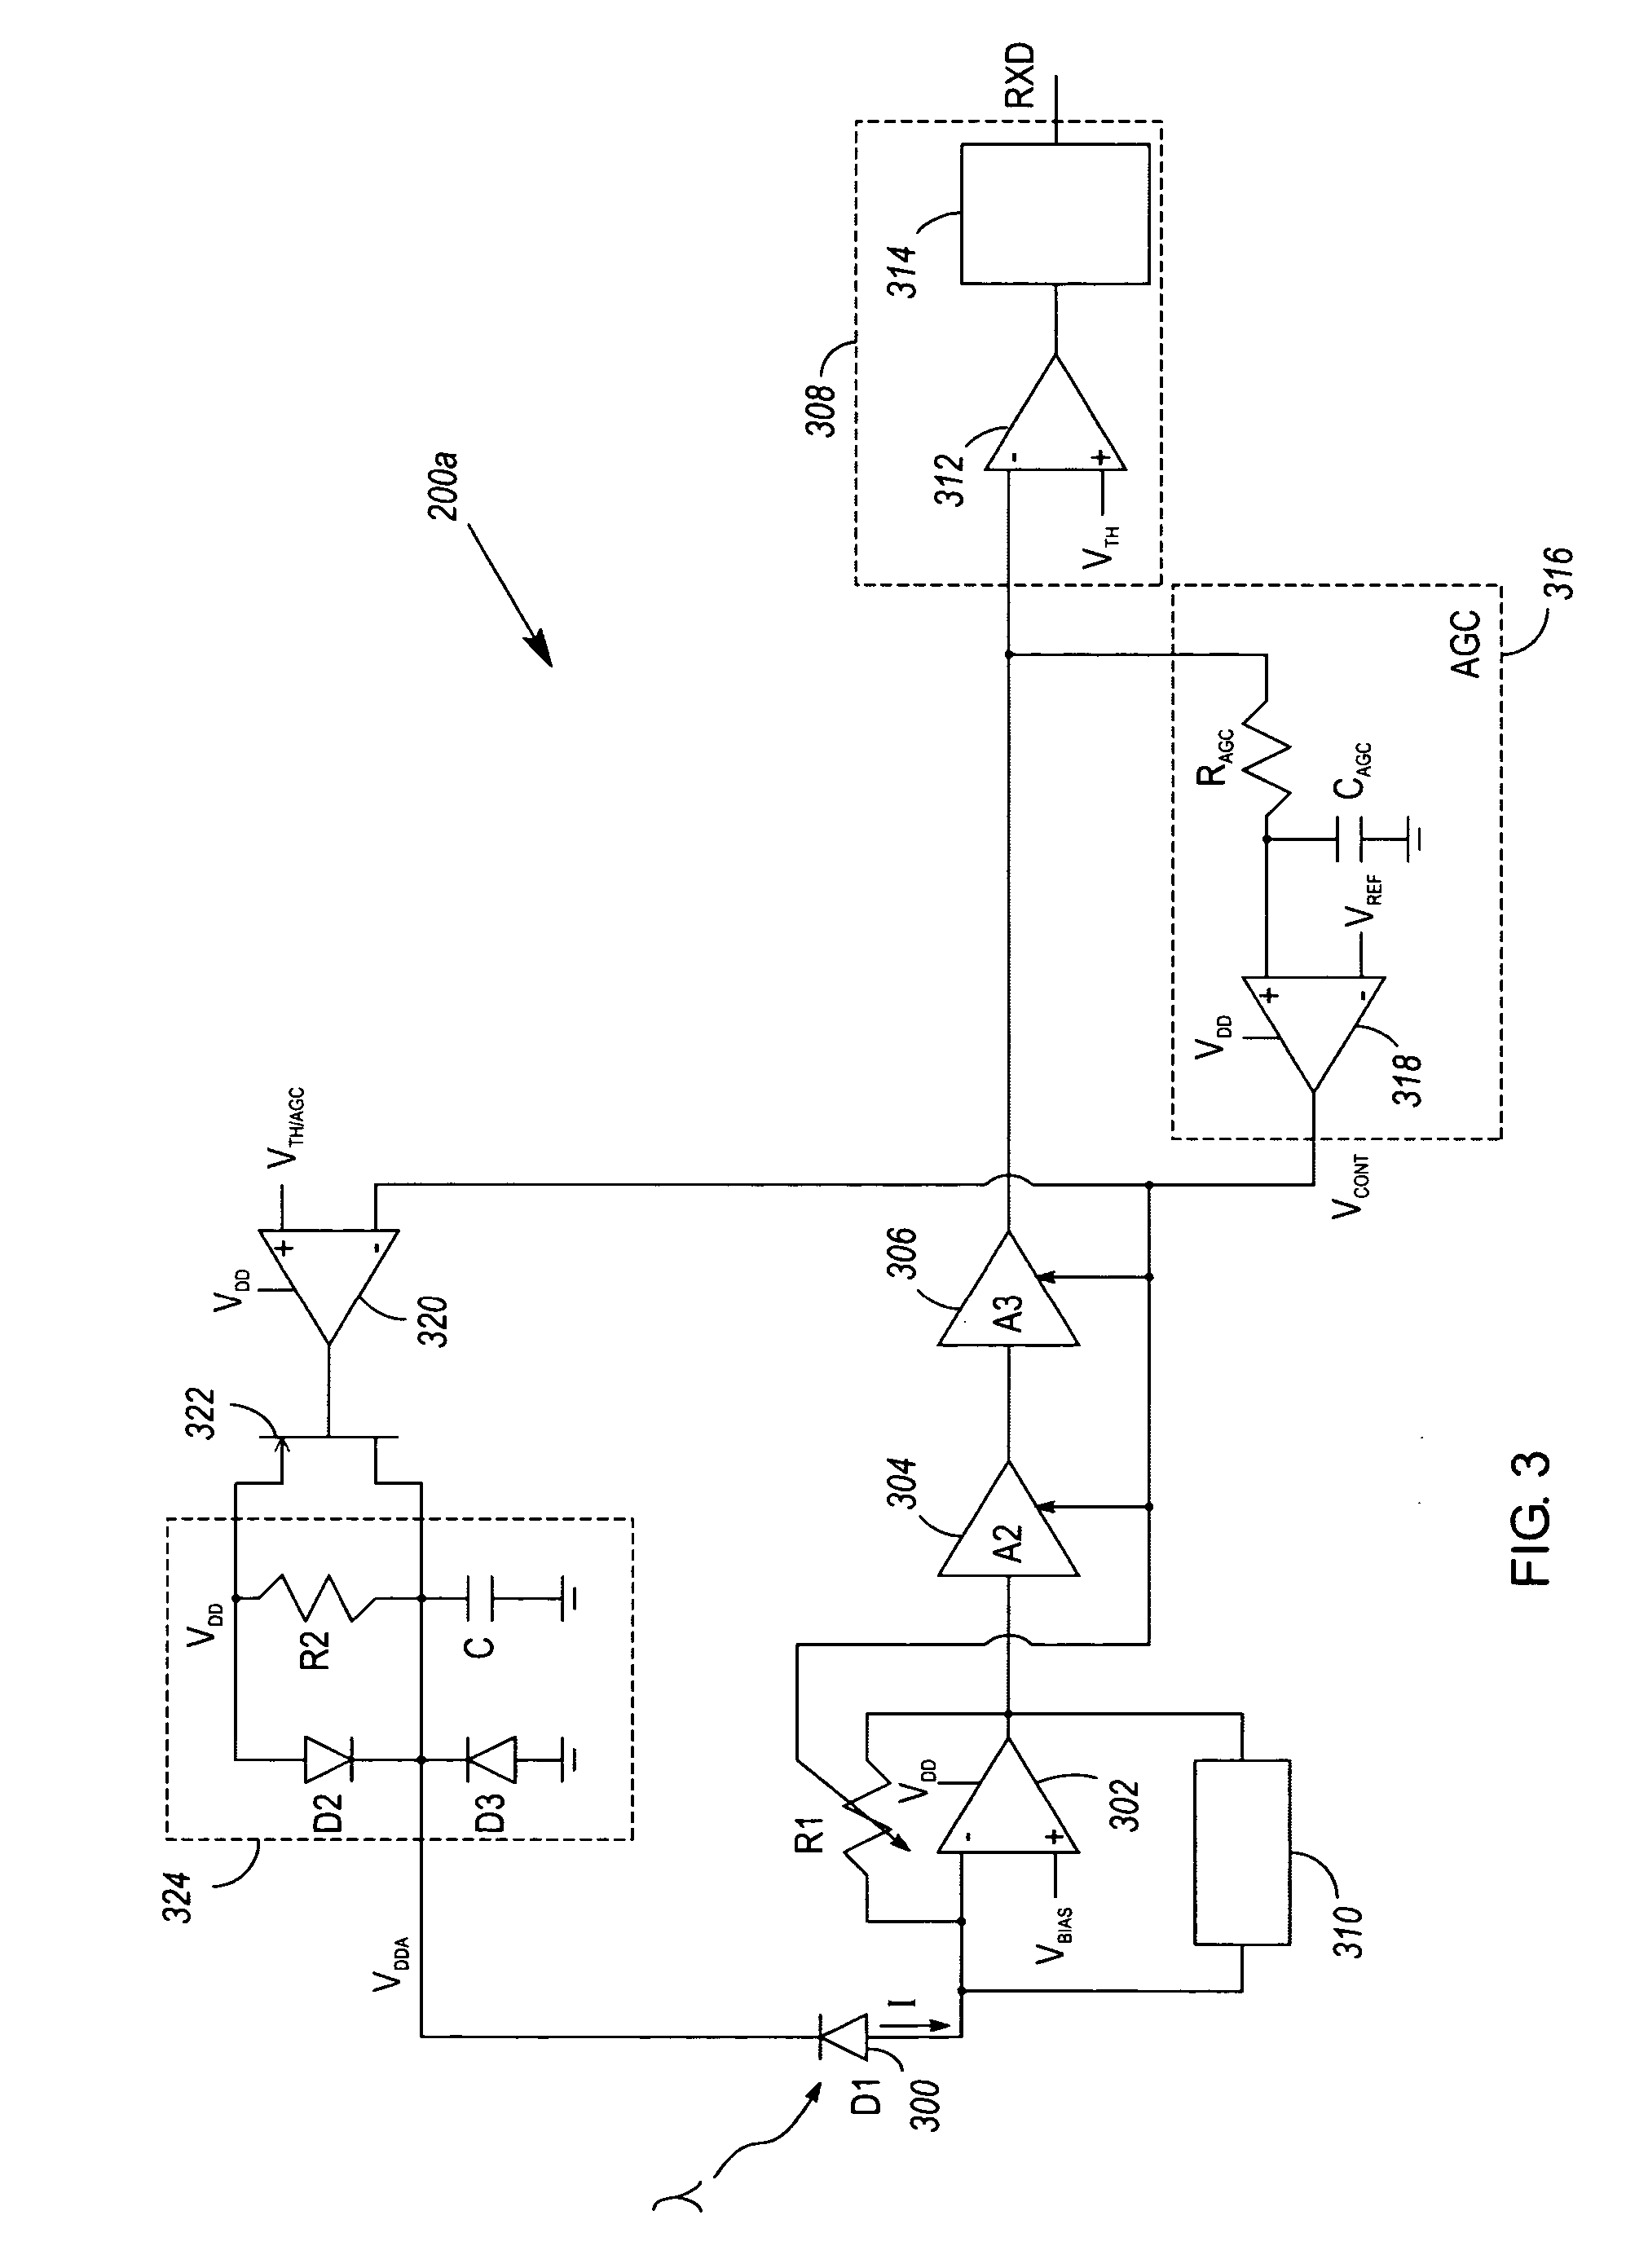 Variable noise control for an optical transducer